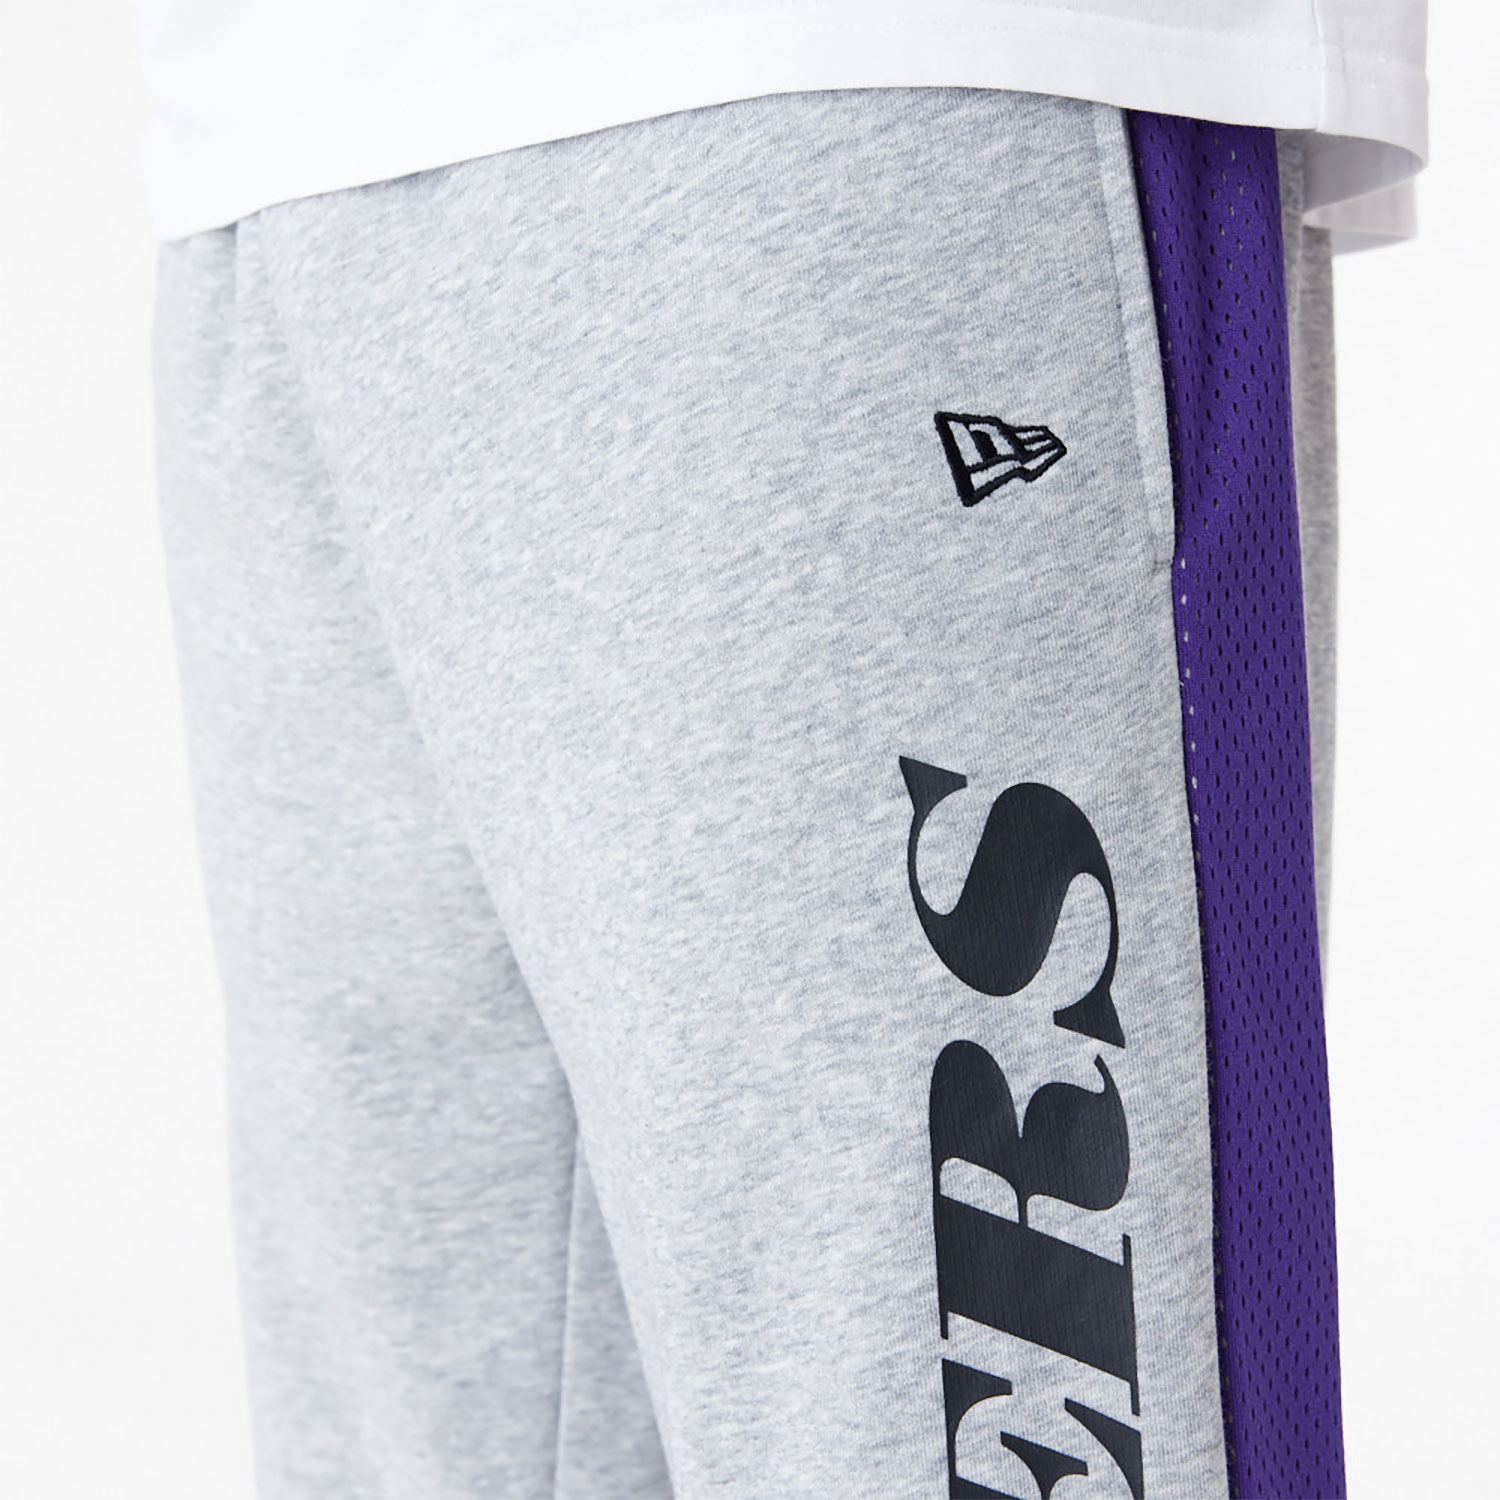 LA Lakers Mesh Panel Grey Relaxed Joggers